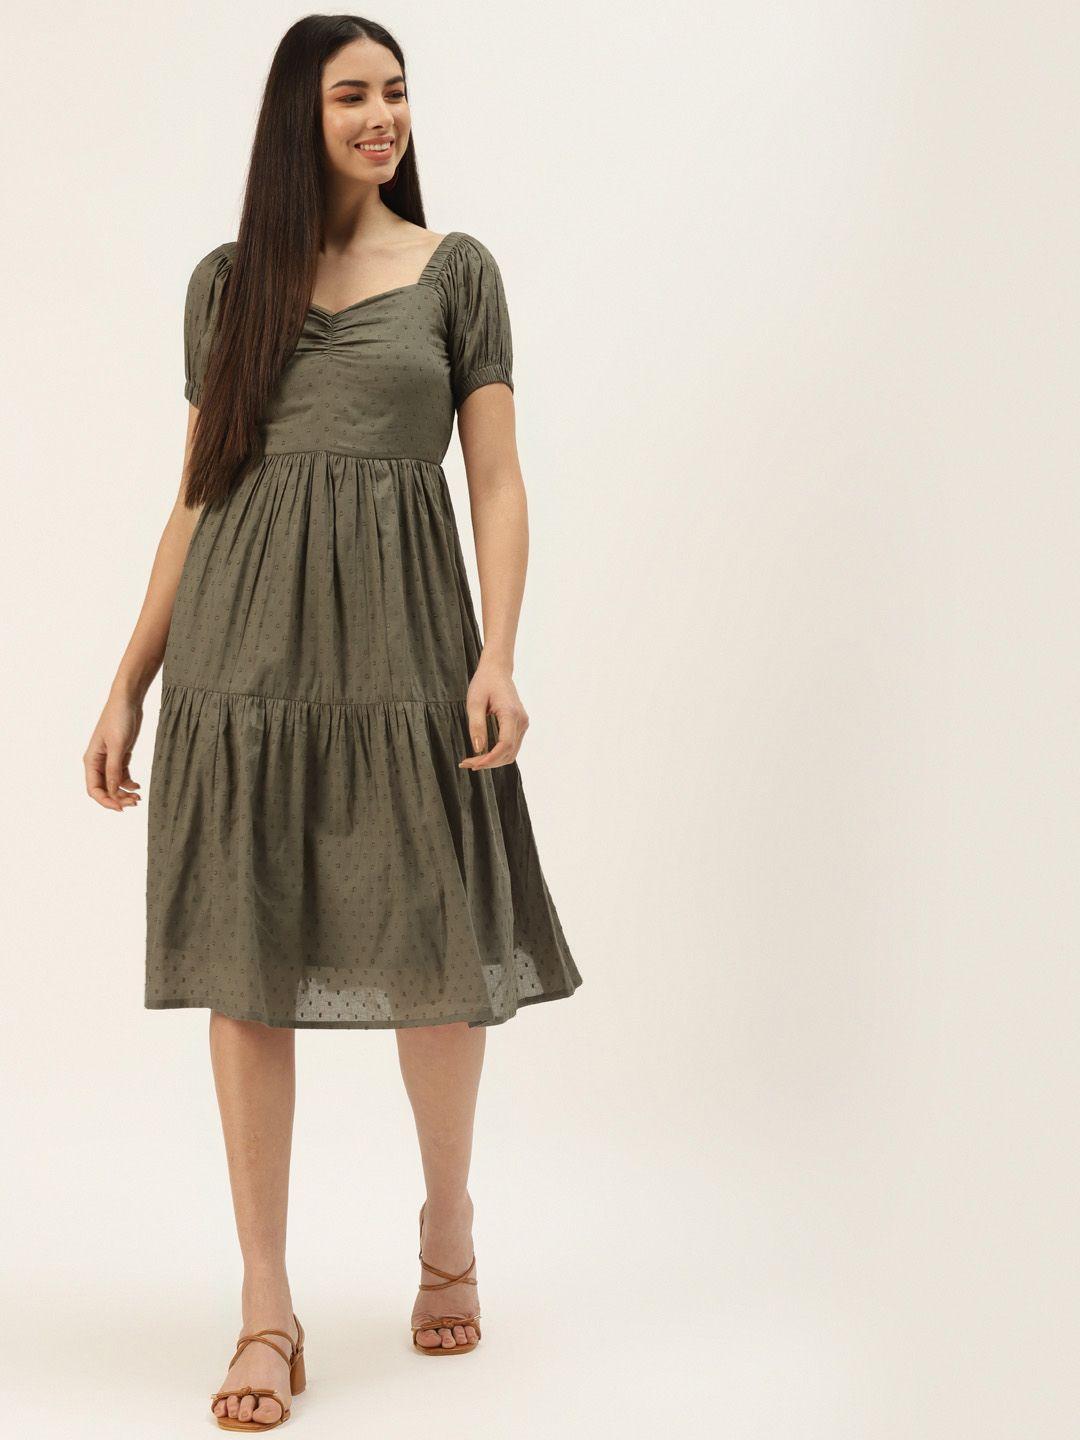 off label olive green tiered dress